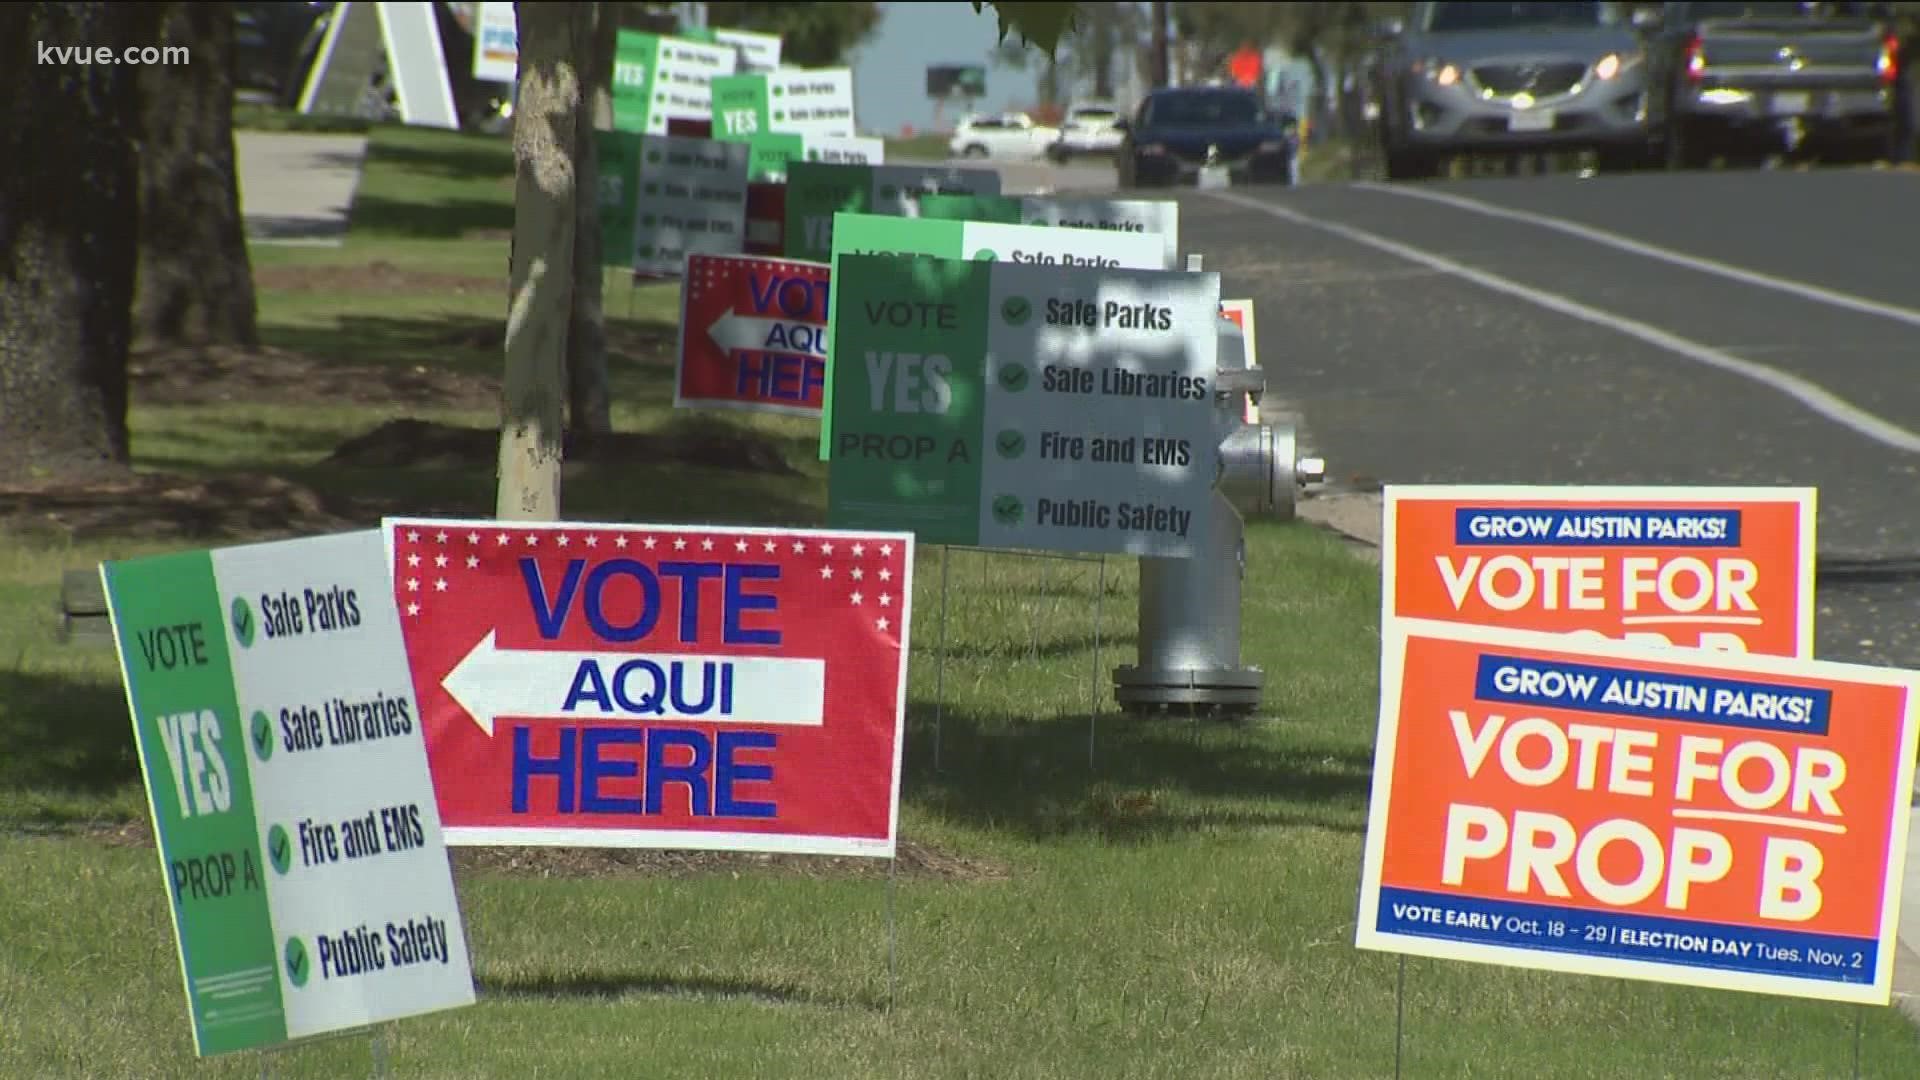 Less than 1% of registered voters have cast their ballots by mail so far.